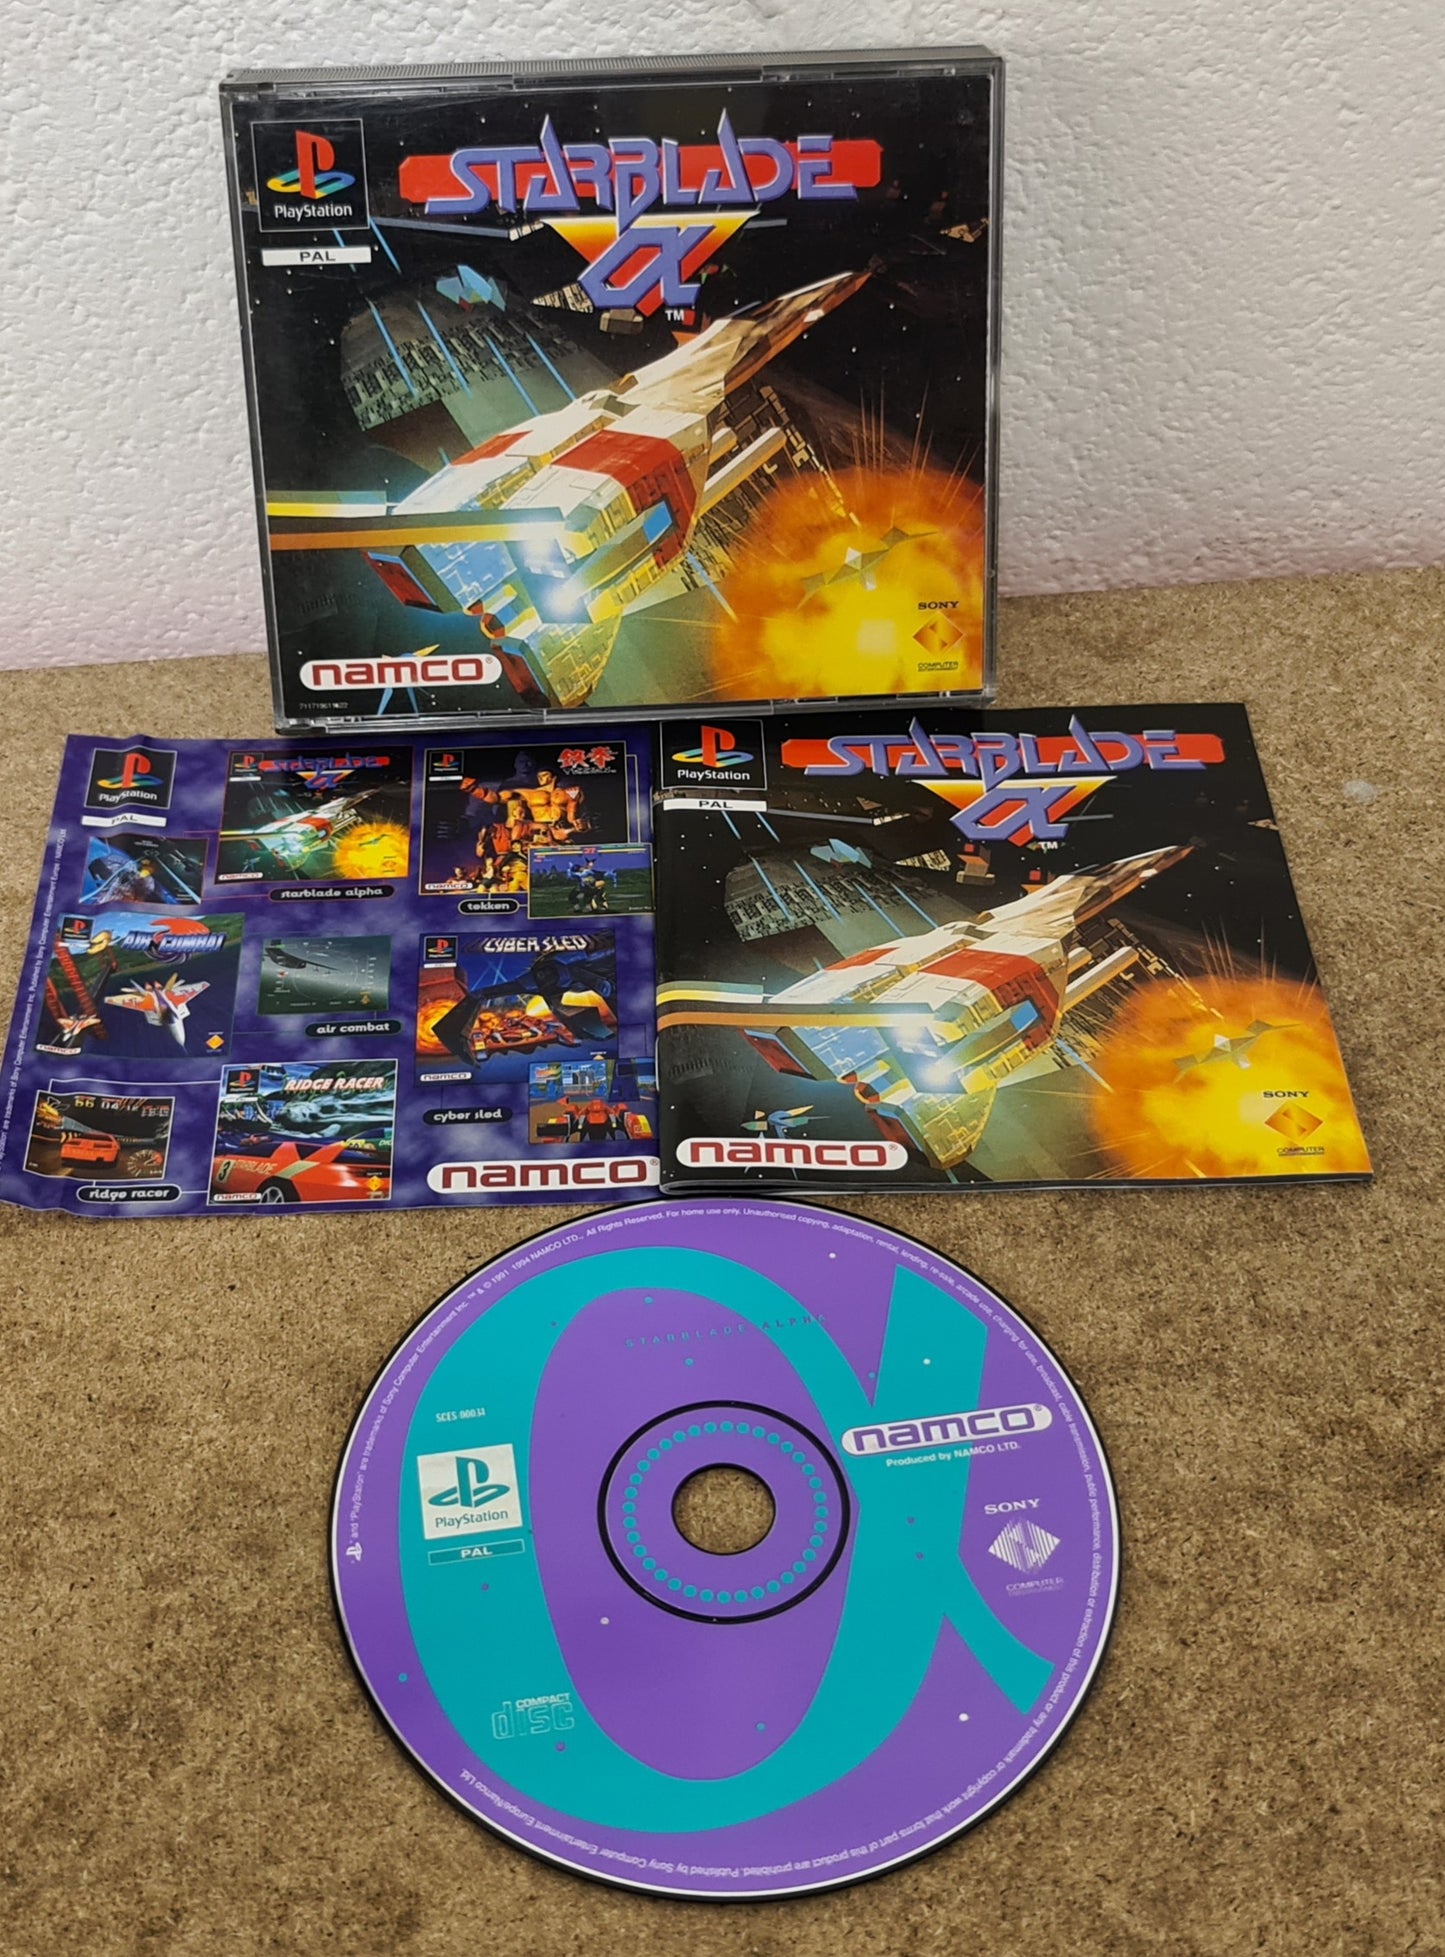 Starblade Alpha PS1 (Sony Playstation 1) game